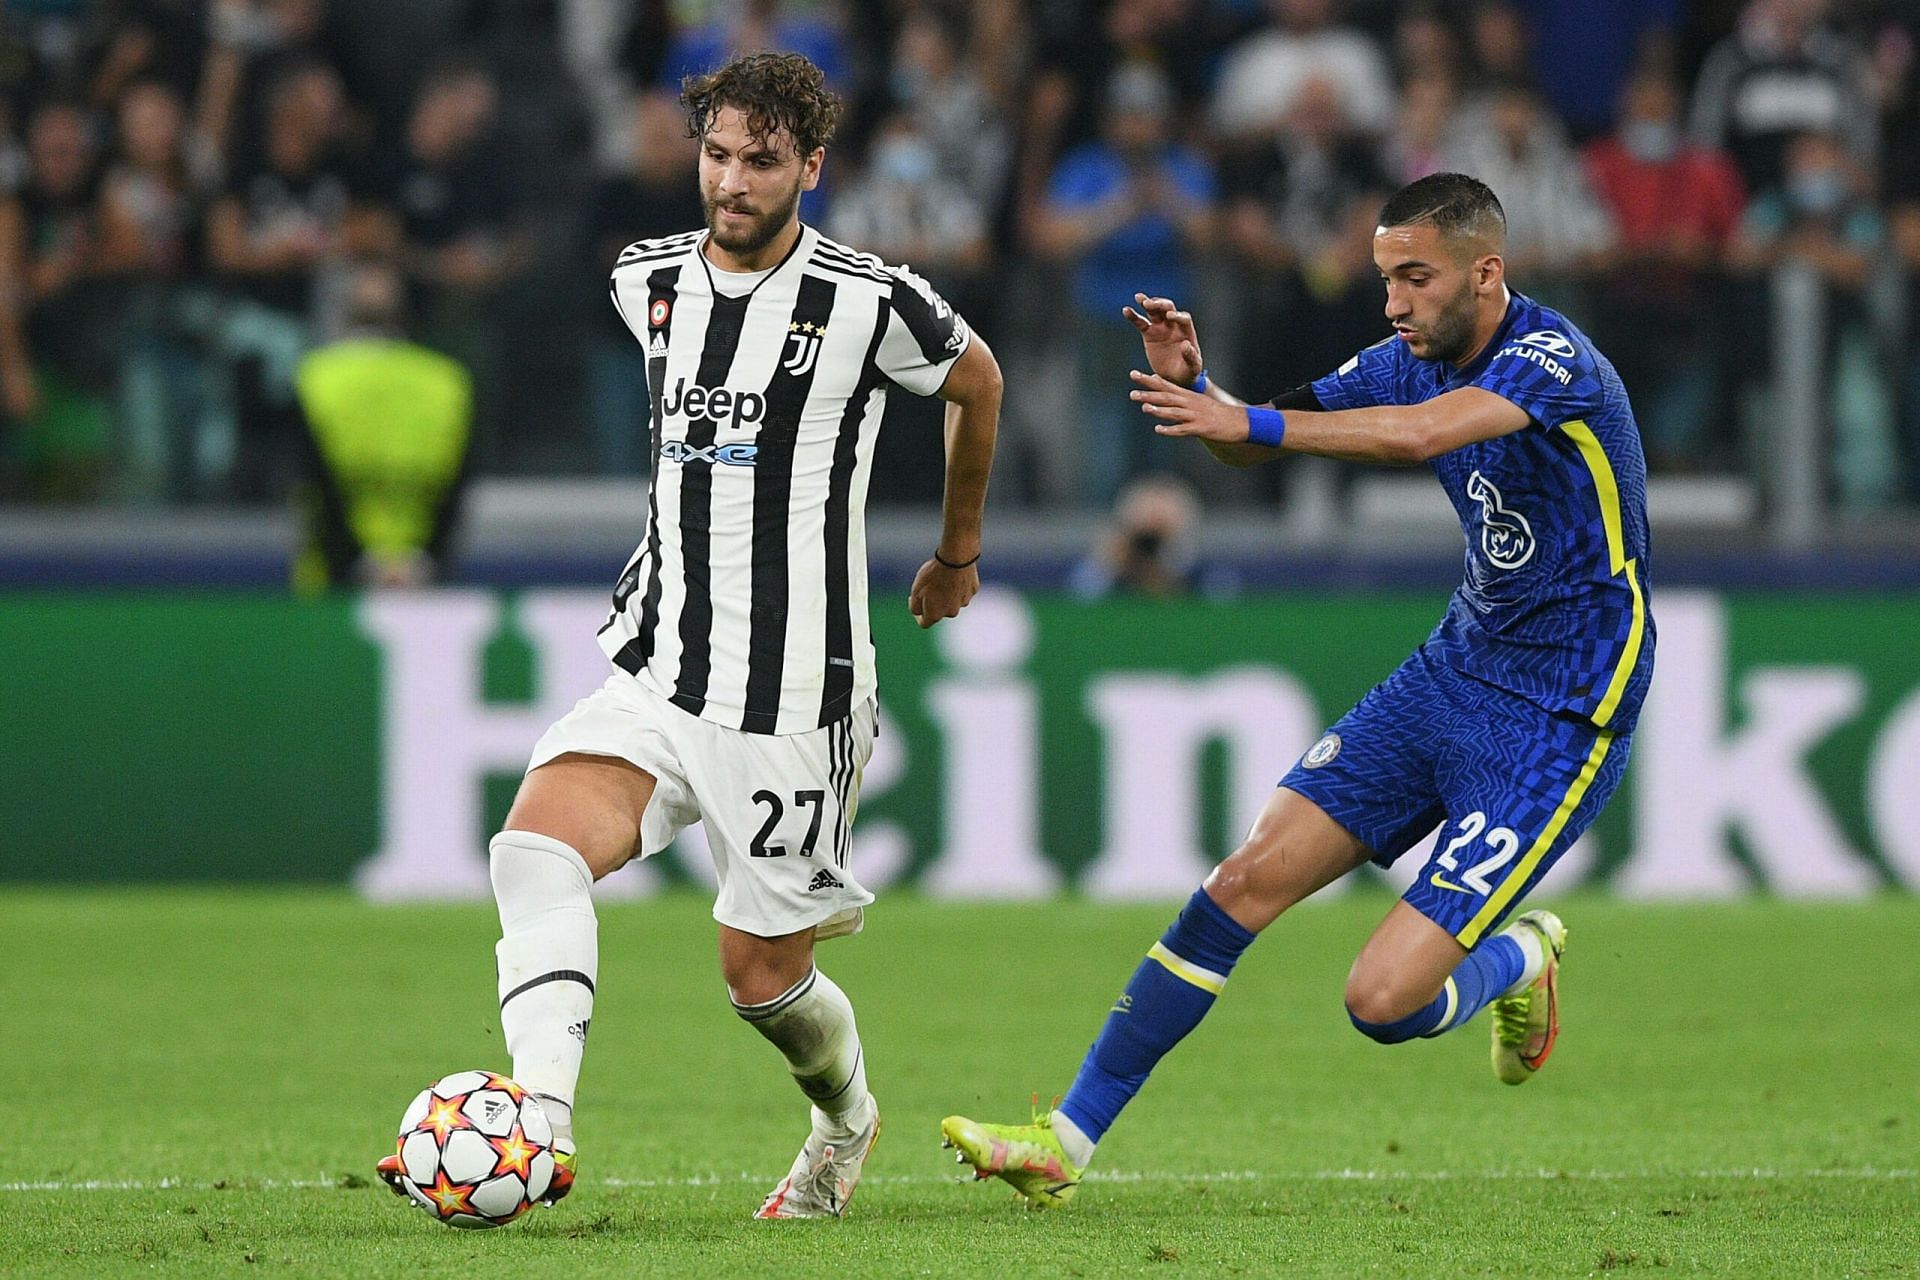 Chelsea are looking to make amends for their loss to Juventus in the reverse